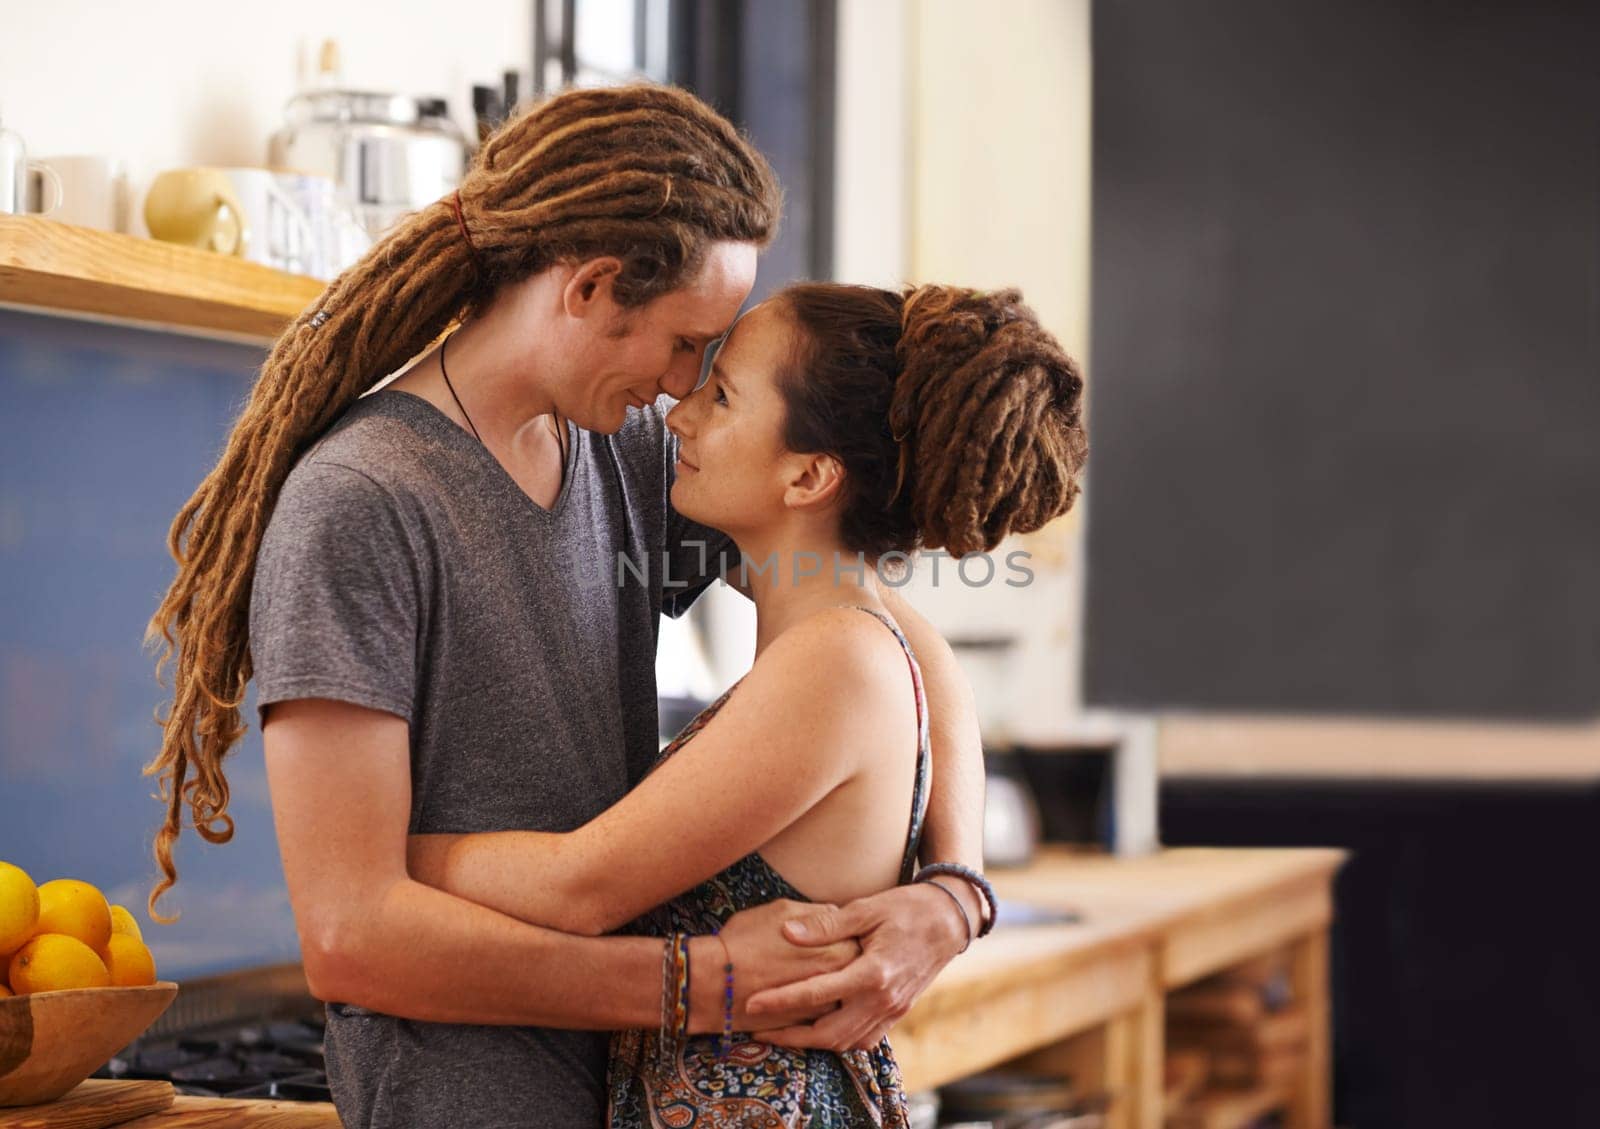 Hug, rasta and home with couple, happiness and bonding together with romance and relaxing. Marriage, apartment and embrace with love and dreadlocks with relationship and cheerful with man and woman by YuriArcurs